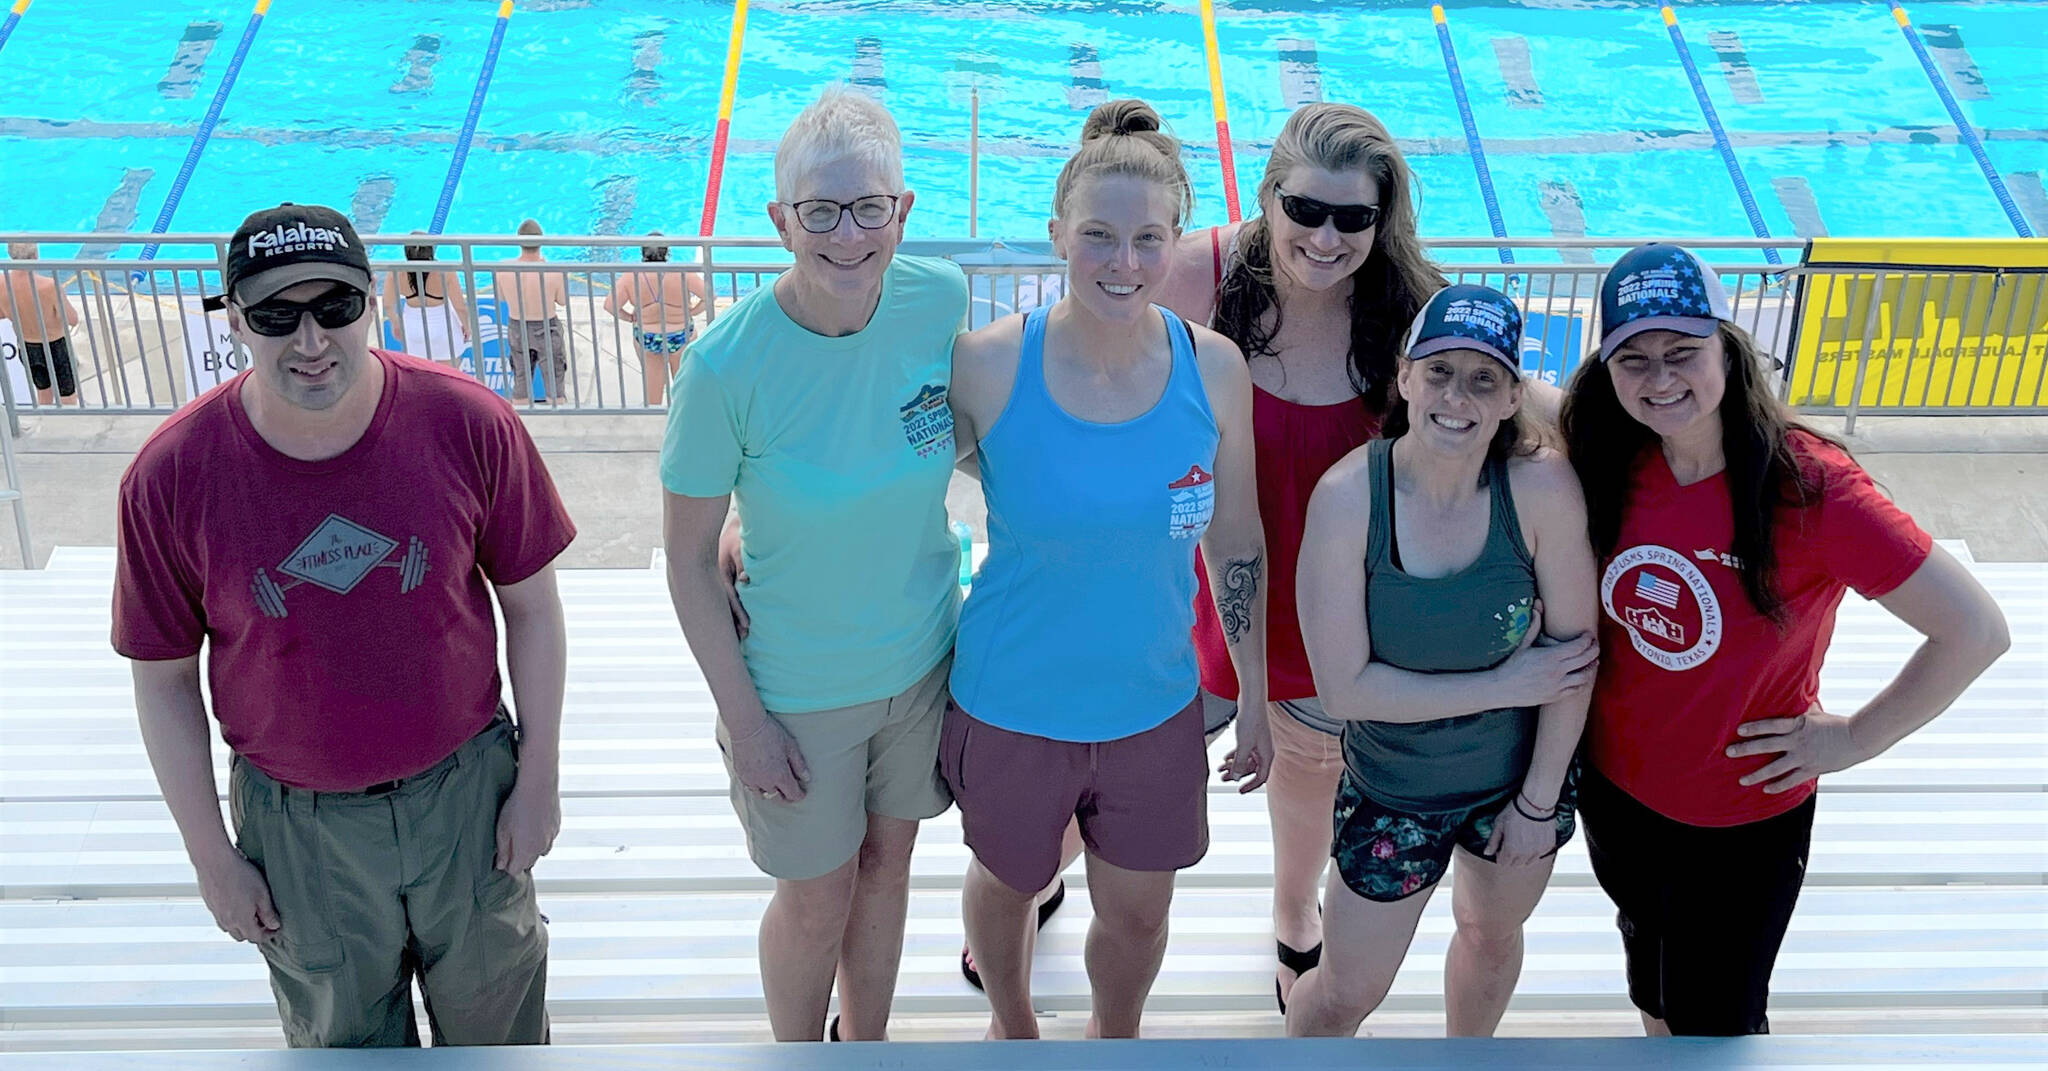 From left to right, Daniel McIntosh, Carolann Barum, Kendra Ashwell, Johna Beech, Angie Brennan and Michelle Turinsky competed at the 2022 U.S. Masters Swimming Spring National Championships in San Antonio from Thursday, April 28, 2022, to Sunday, May 1, 2022. (Photo provided)